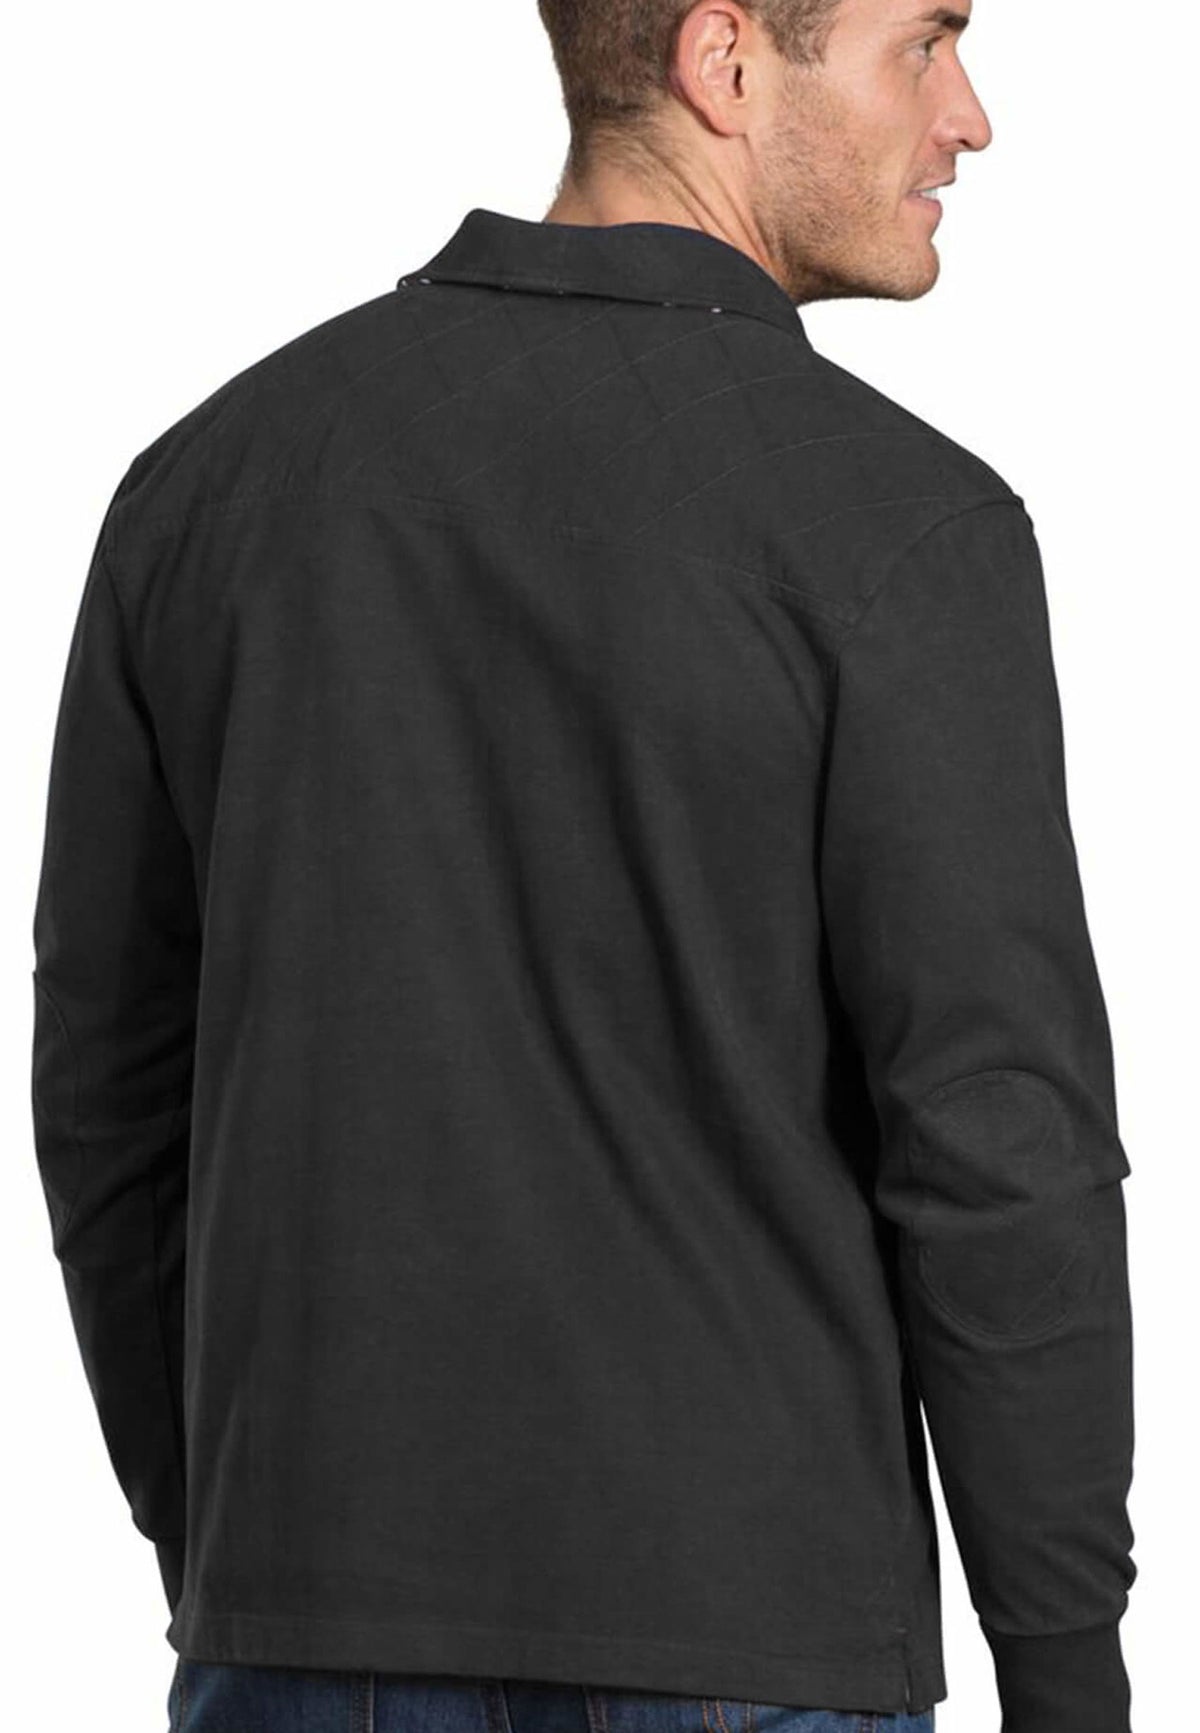 Long Sleeve Classic Rugby - Black